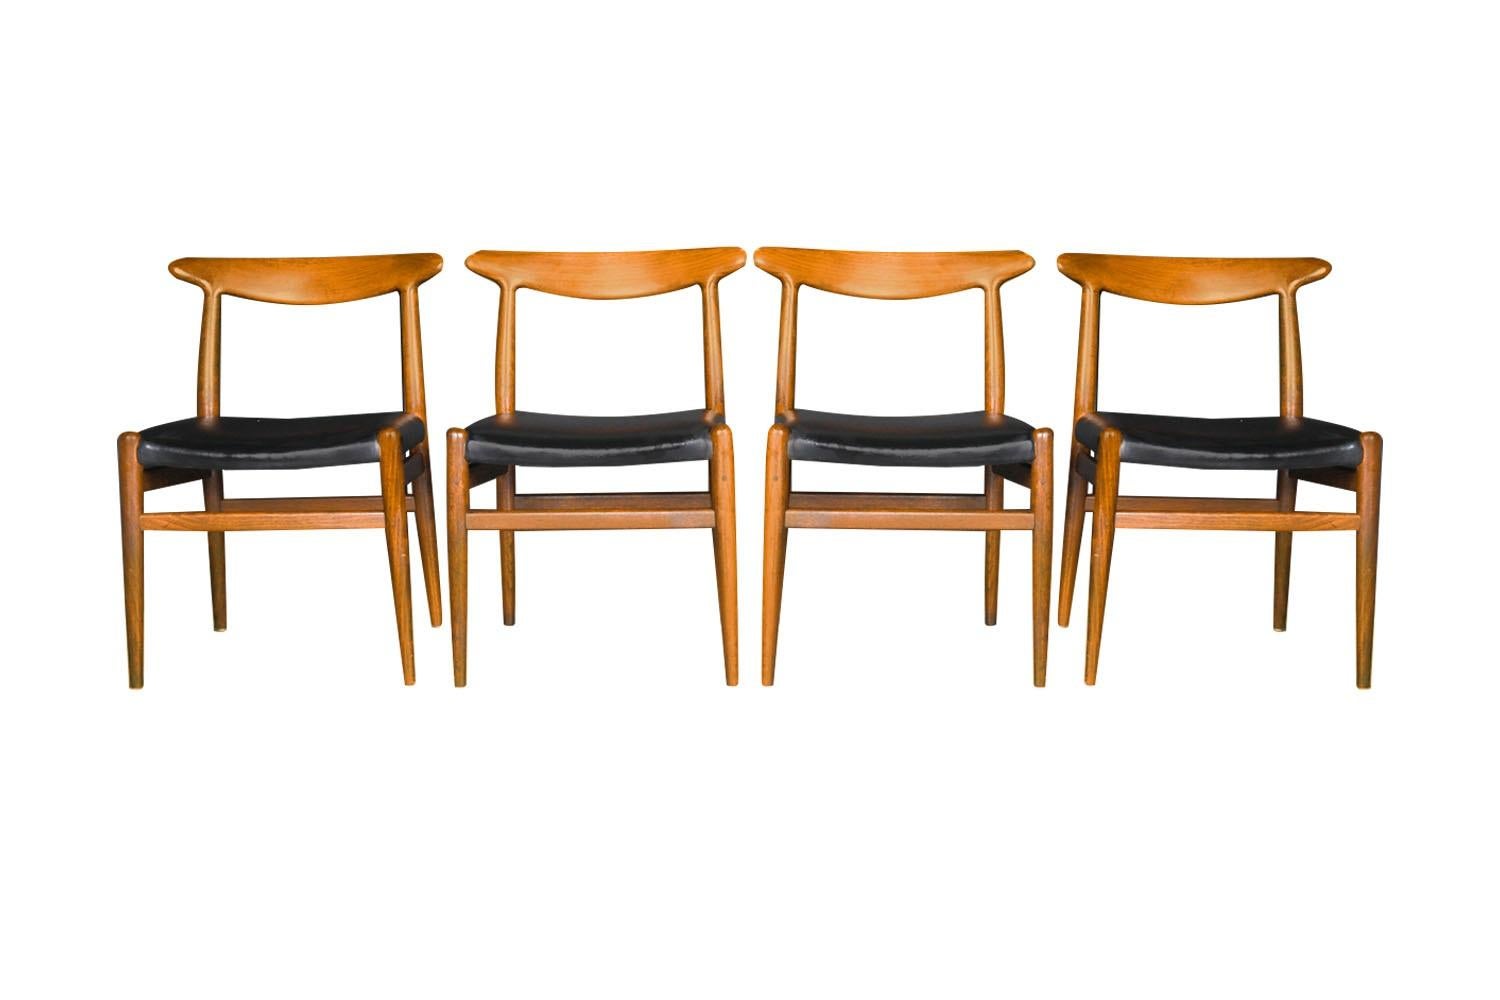 An exceptional set of four original 'W2' model chairs, designed by Hans J. Wegner, Denmark, circa 1960's. The teak frames feature modern styling with a distinct beautiful design, sculpturally carved backrests and rich, warm teak frames. Each seat